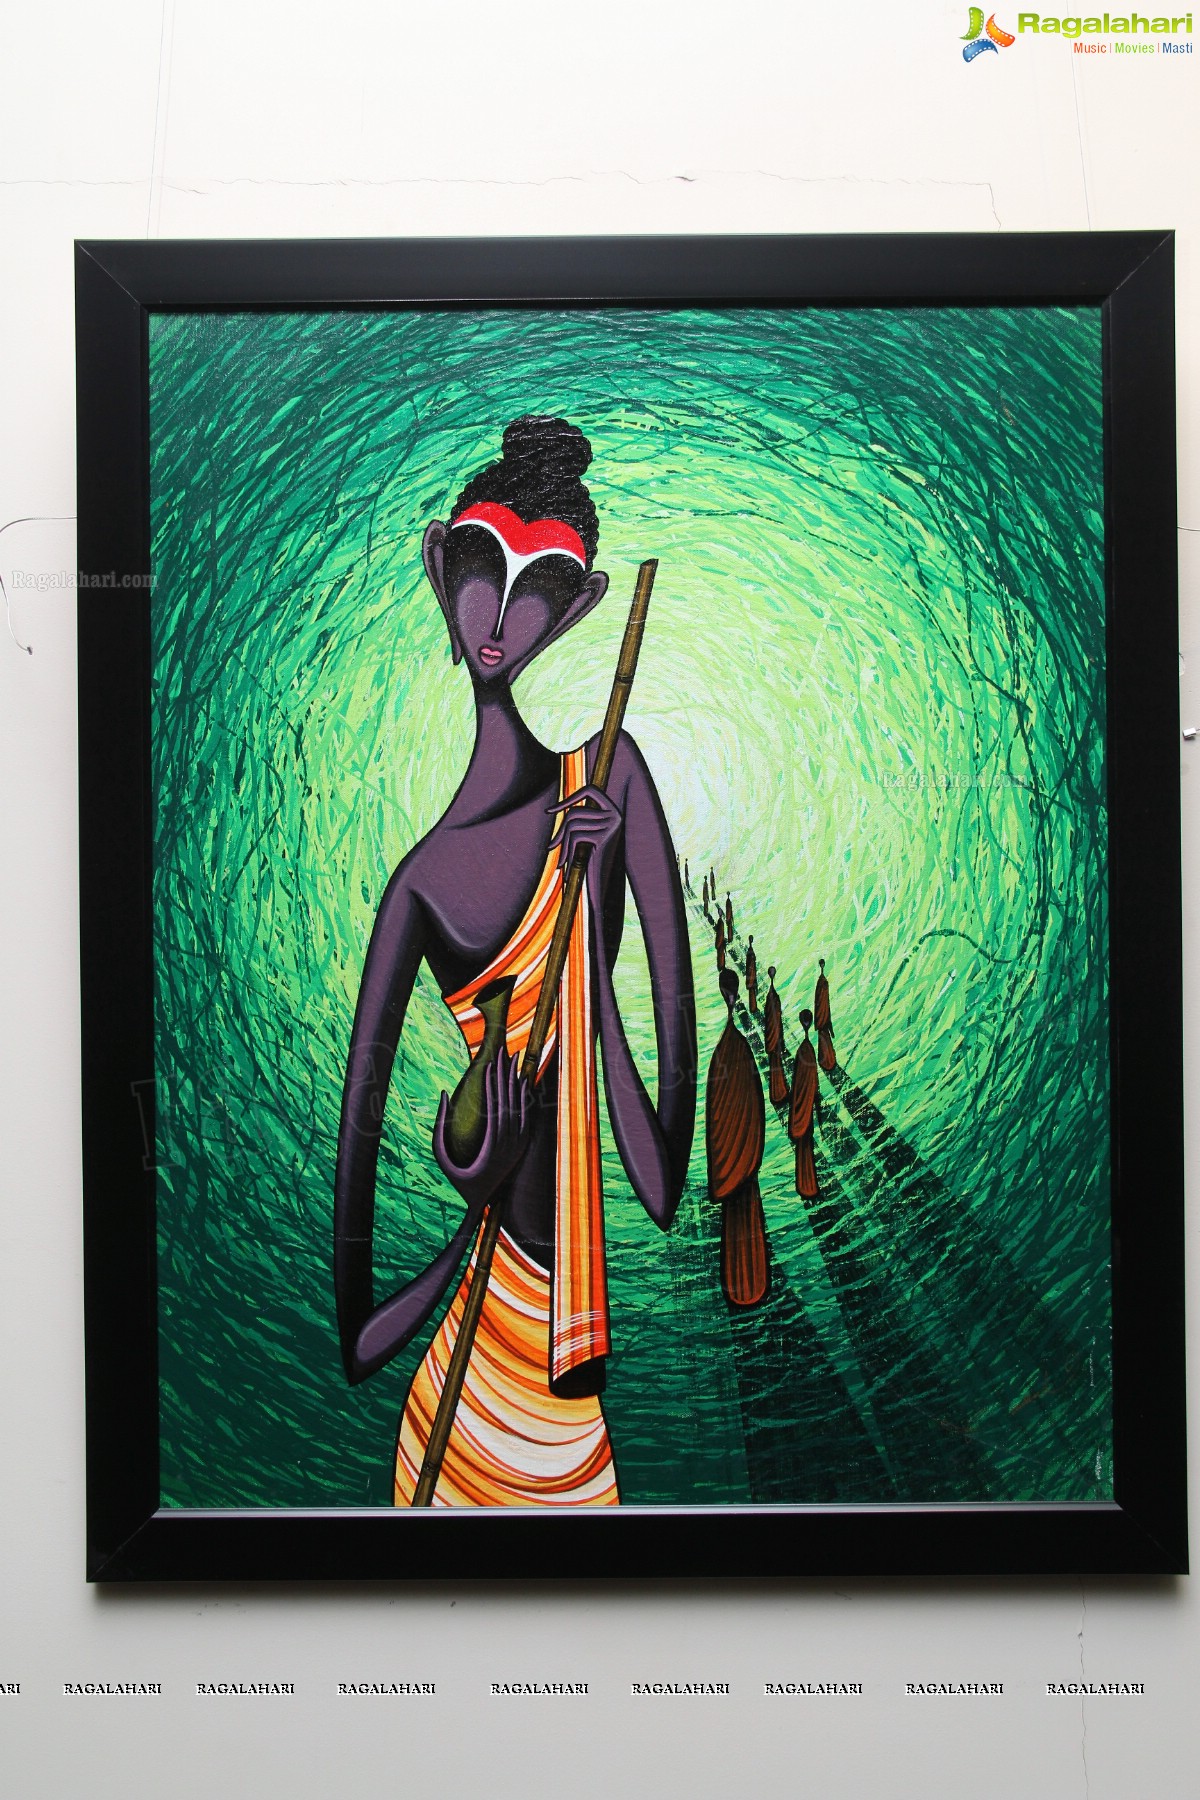 ArtBeat - Art Exhibition at Poecile, Hyderabad